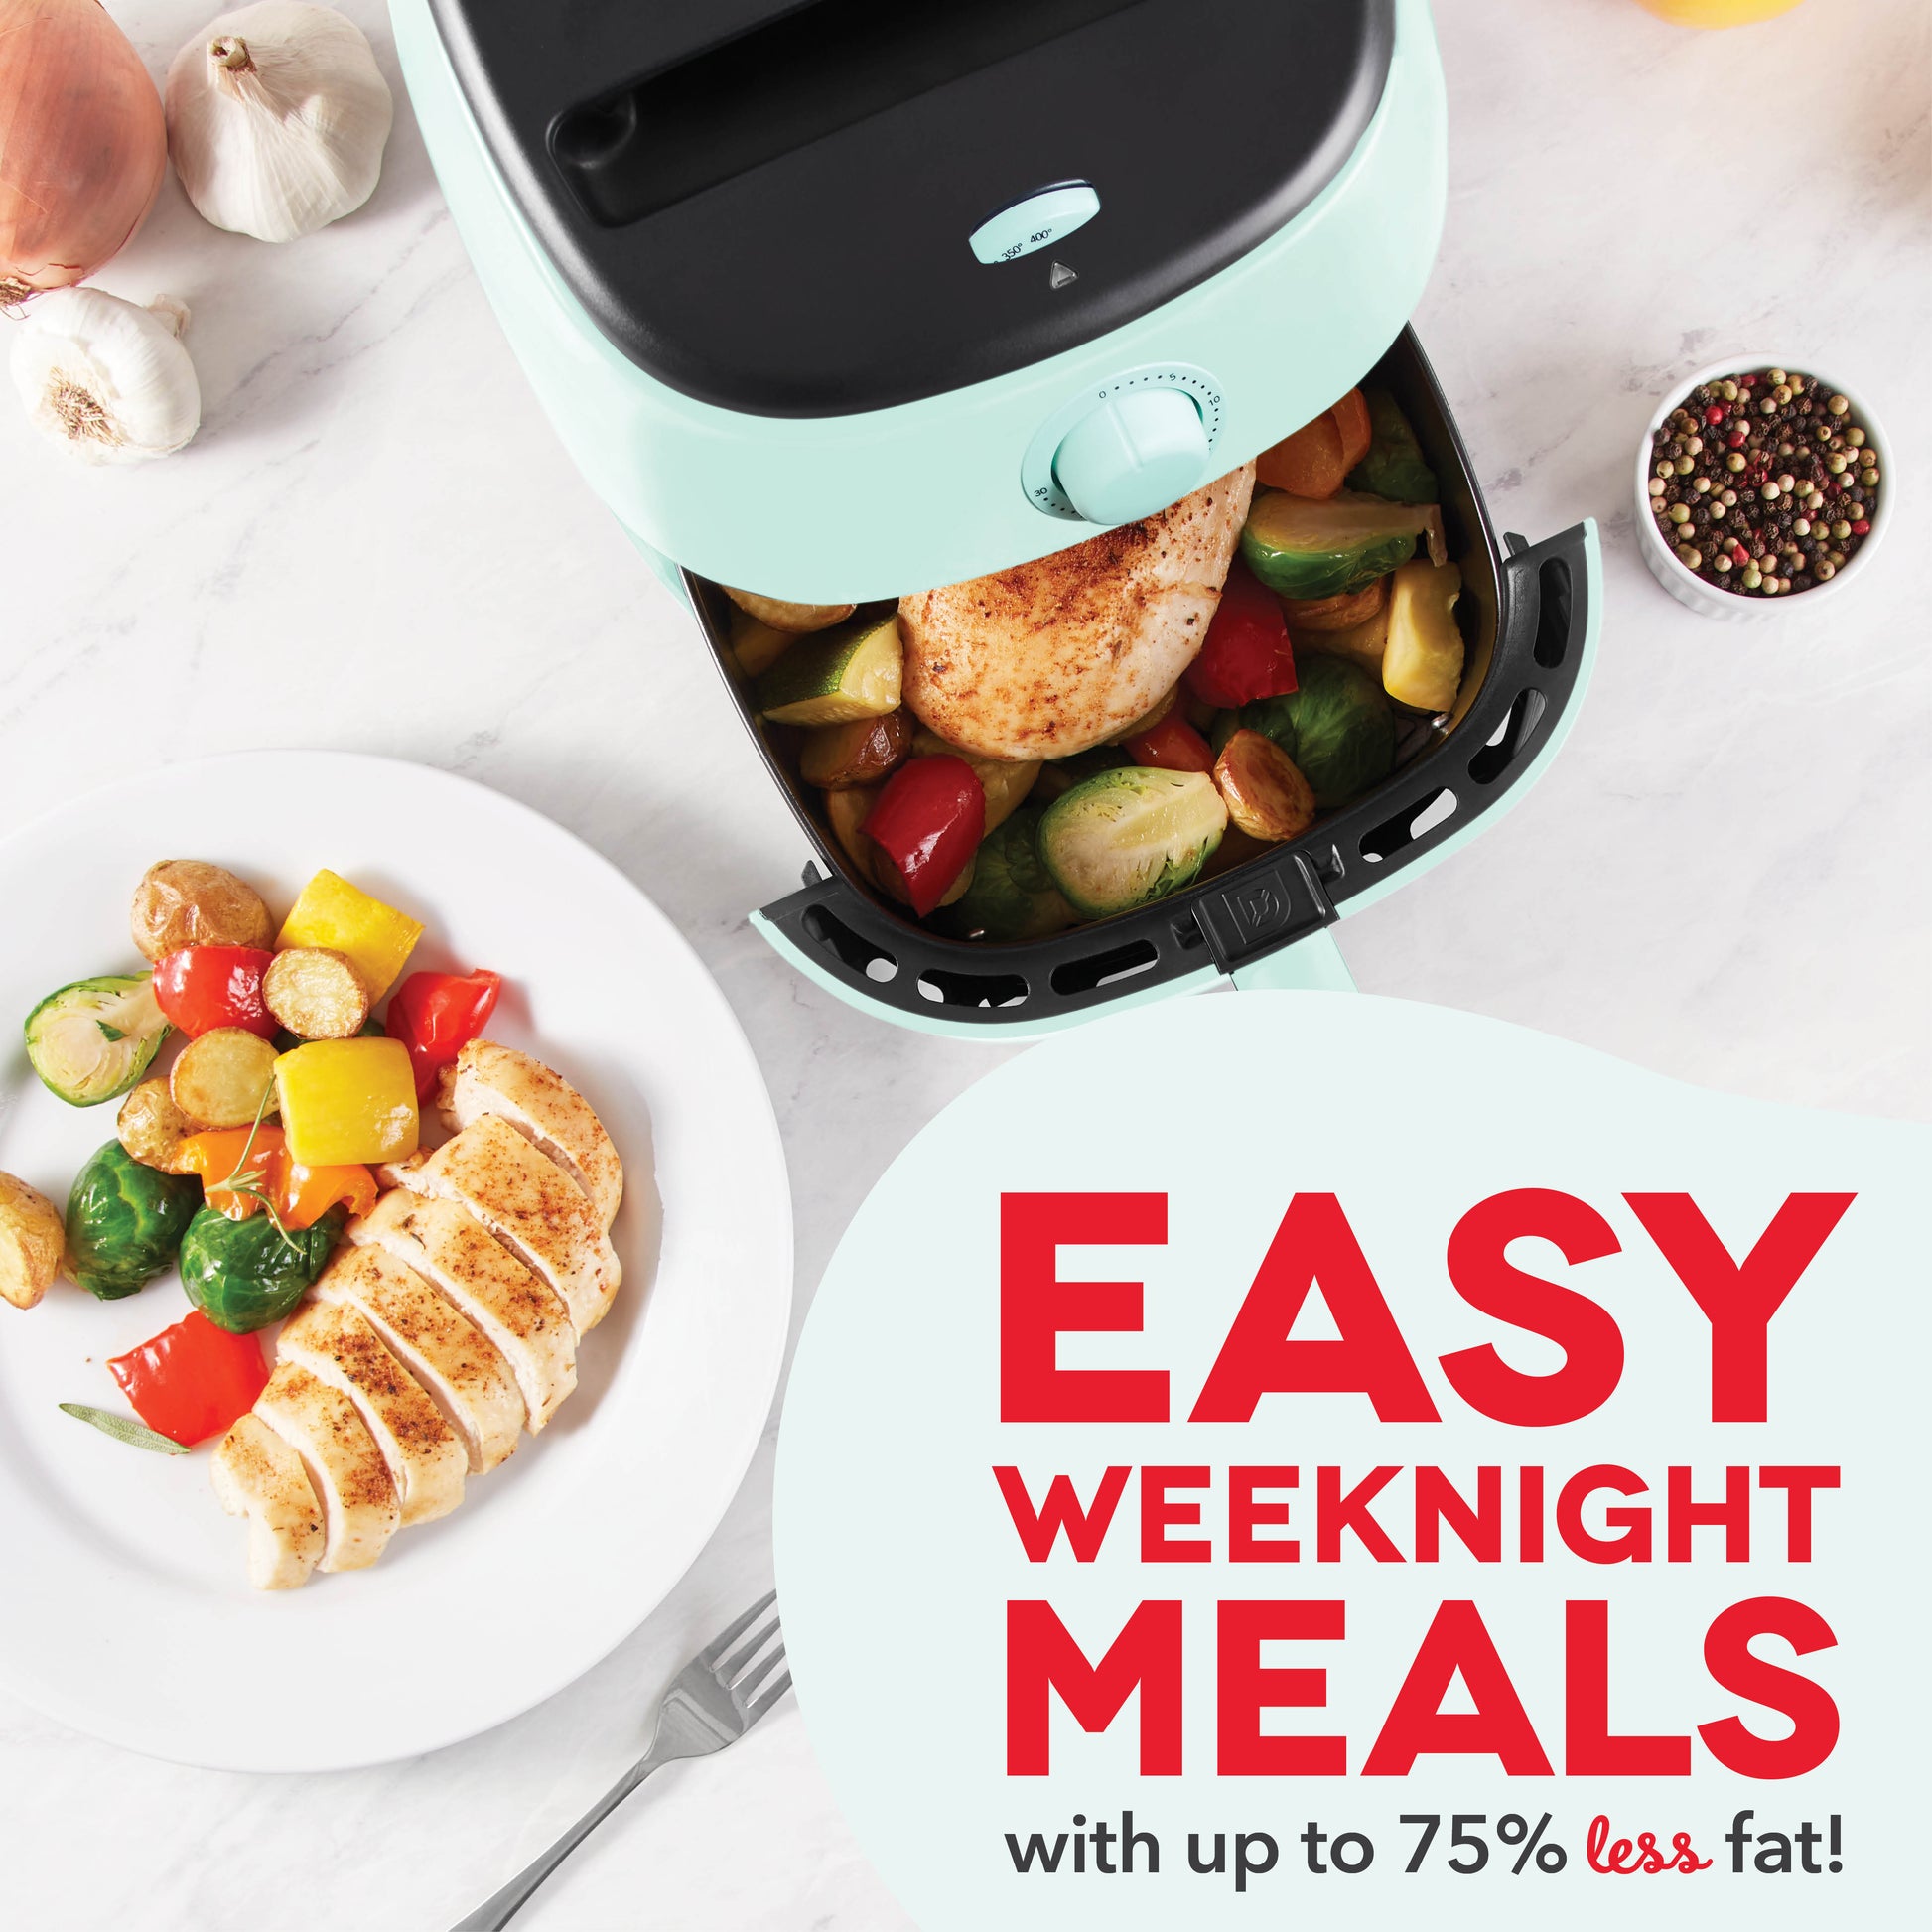 6L 1200W Smart Air Fryer - Achieve Healthier Crispy Meals with Easy-to-Use  Low-Fat Cooking Technology